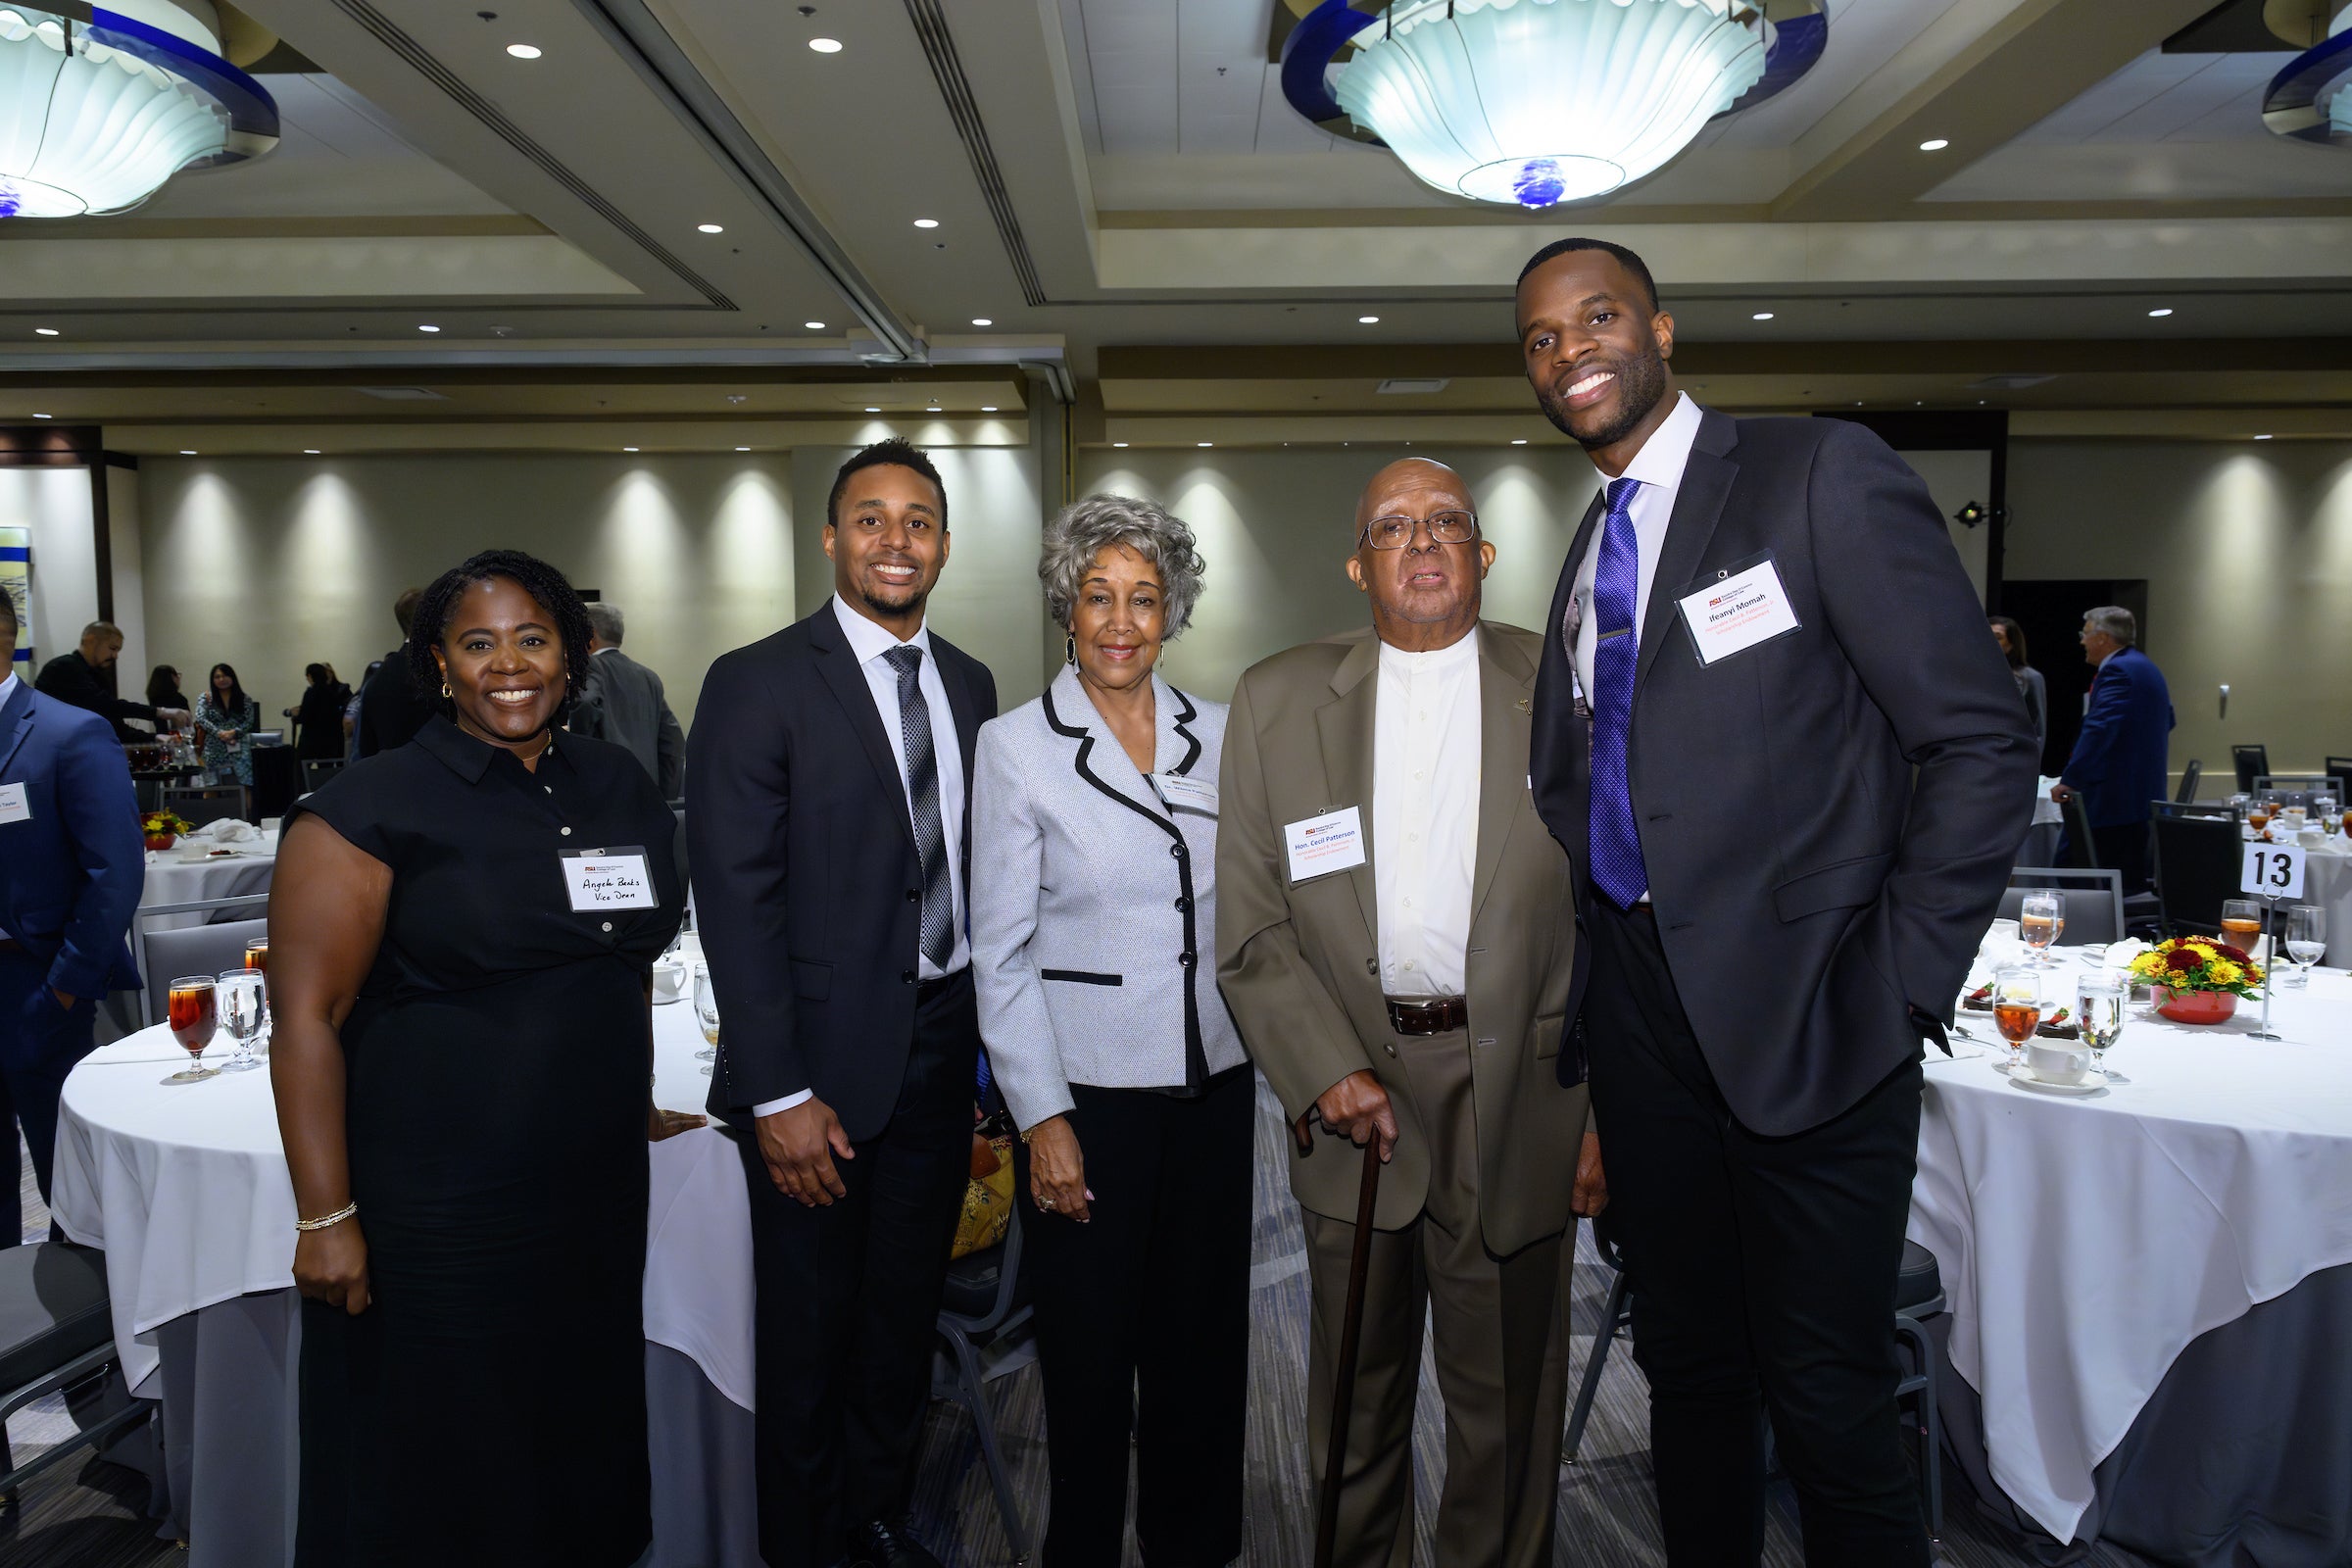 Professor Angela Banks standing with the Honorable Cecil B. Patterson, Dr. Wilma Patterson, and student, Ifeanyi Momah at the 2023 Scholarship Luncheon.